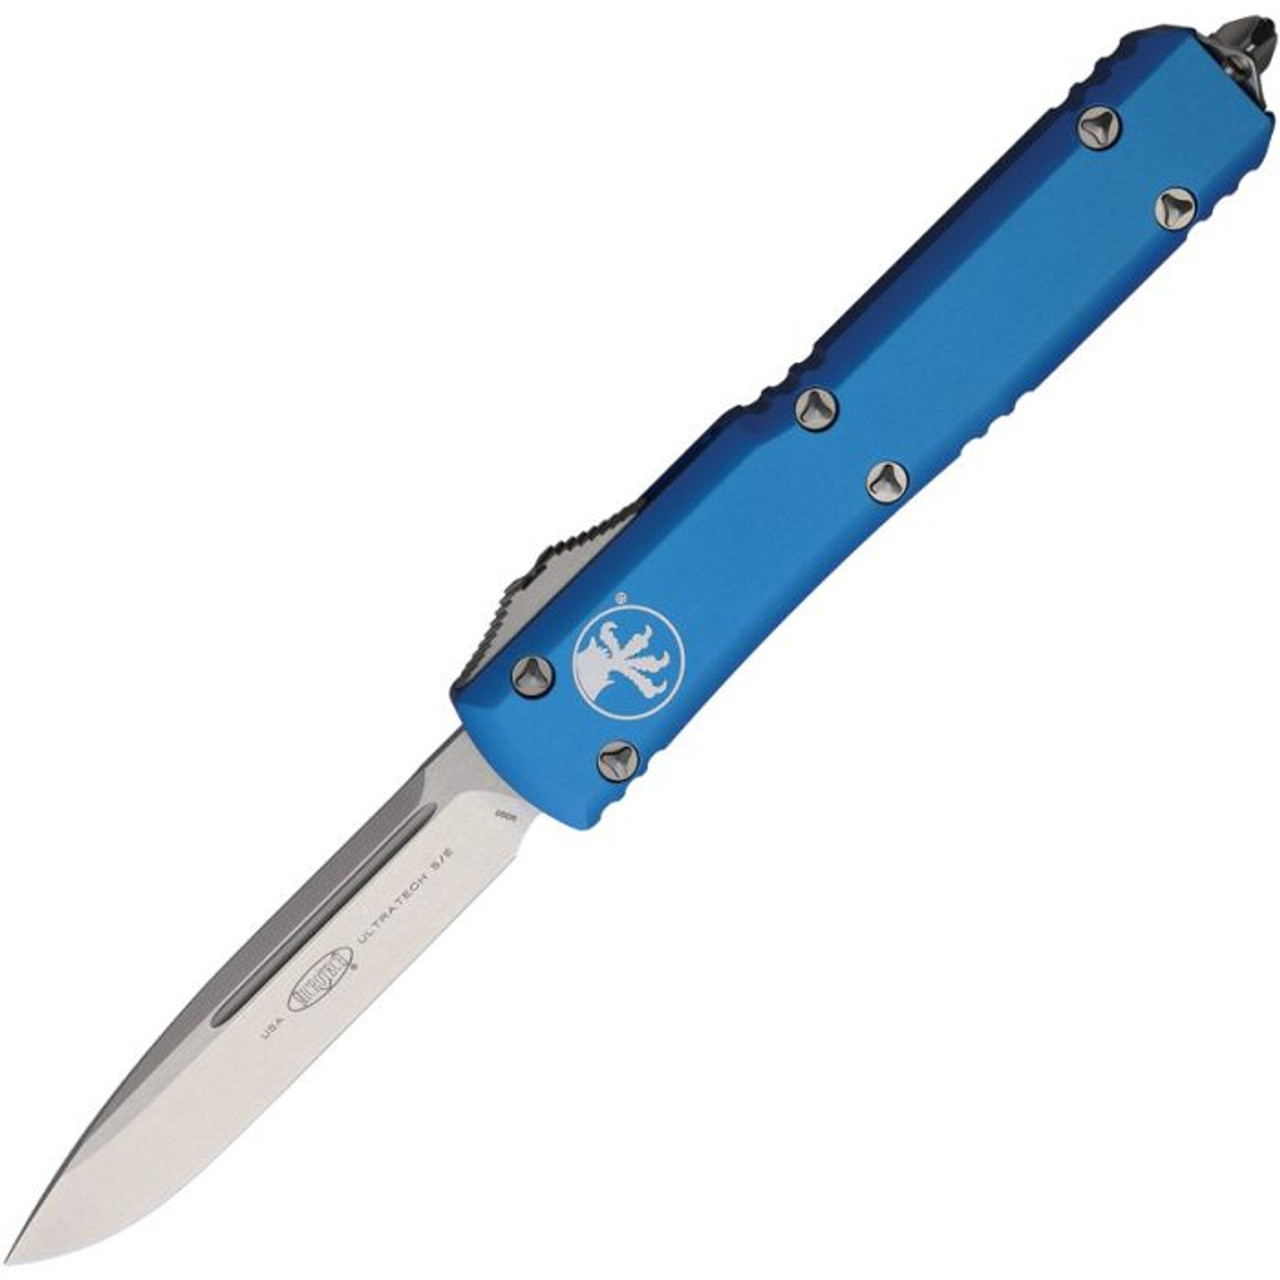 Microtech Ultratech S/E (MCT12110BL) 3.5" Bohler M390 Stonewashed Drop Point Plain Blade, Blue Anodized Aluminum Handle with Glass Breaker